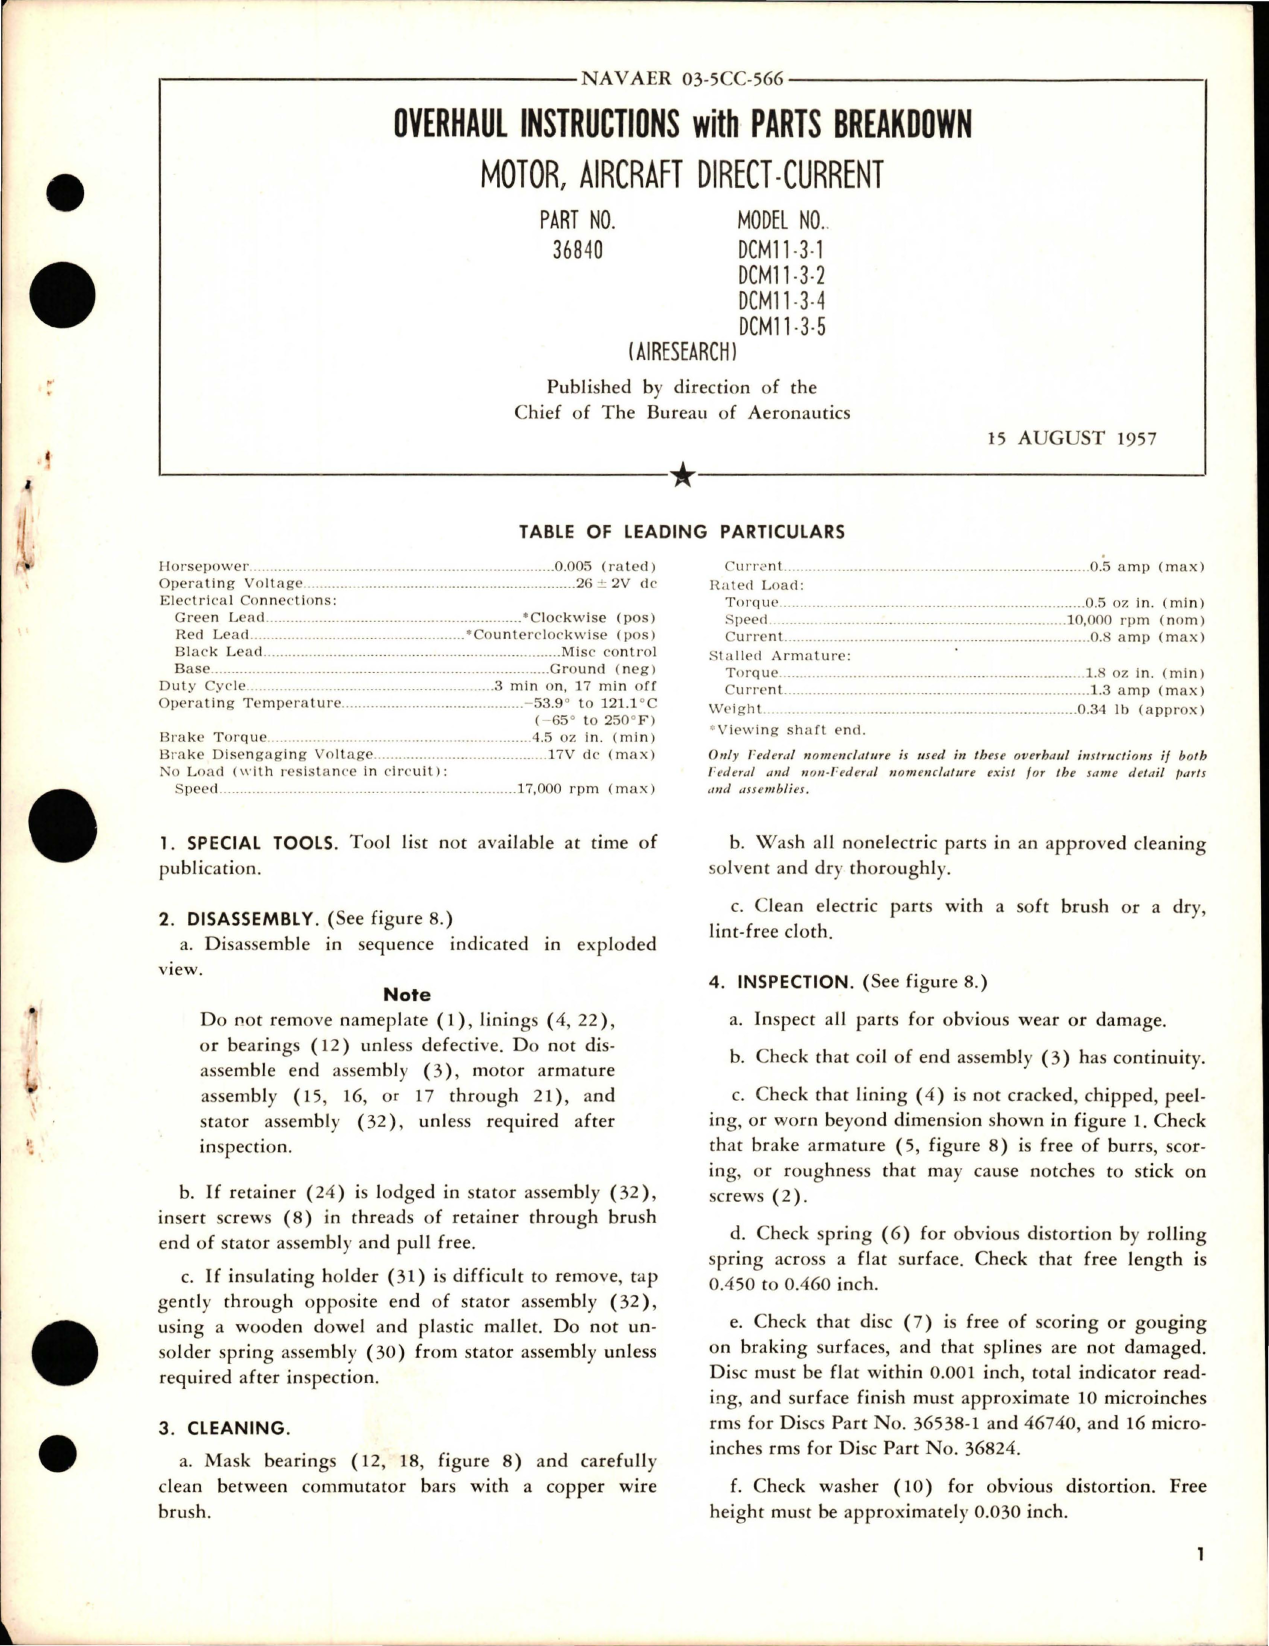 Sample page 1 from AirCorps Library document: Overhaul Instructions with Parts Breakdown for Direct-Current Motor - Part 36840